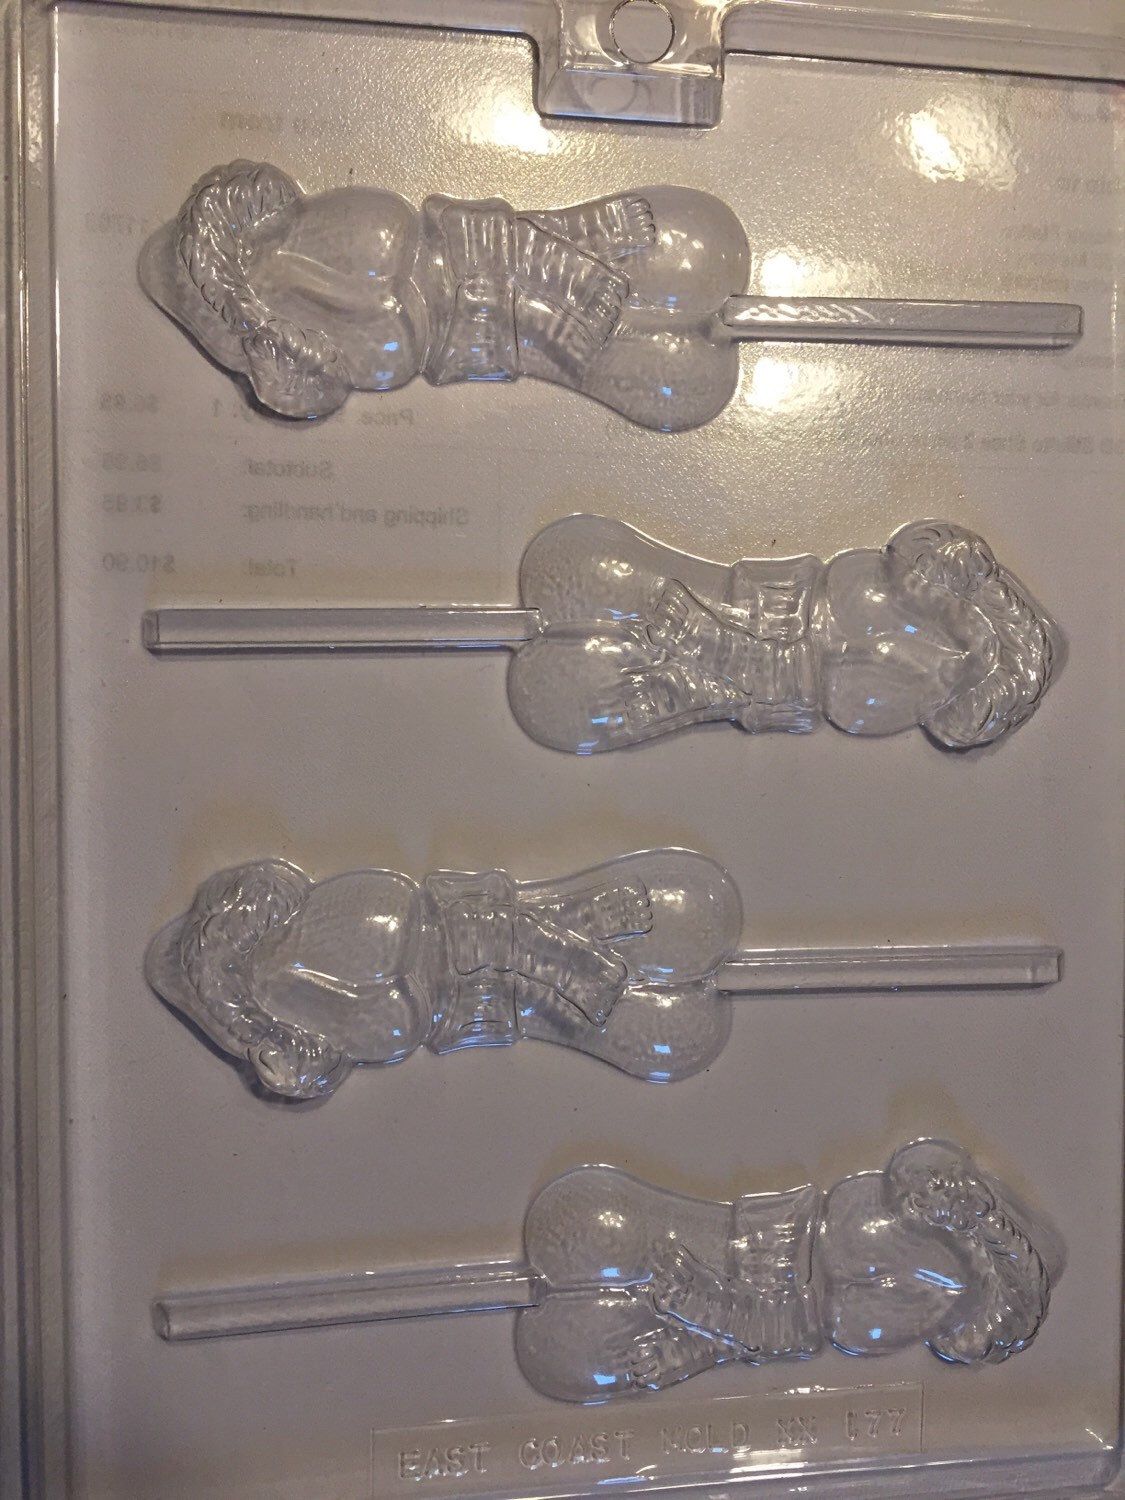 Adult candy hard mold